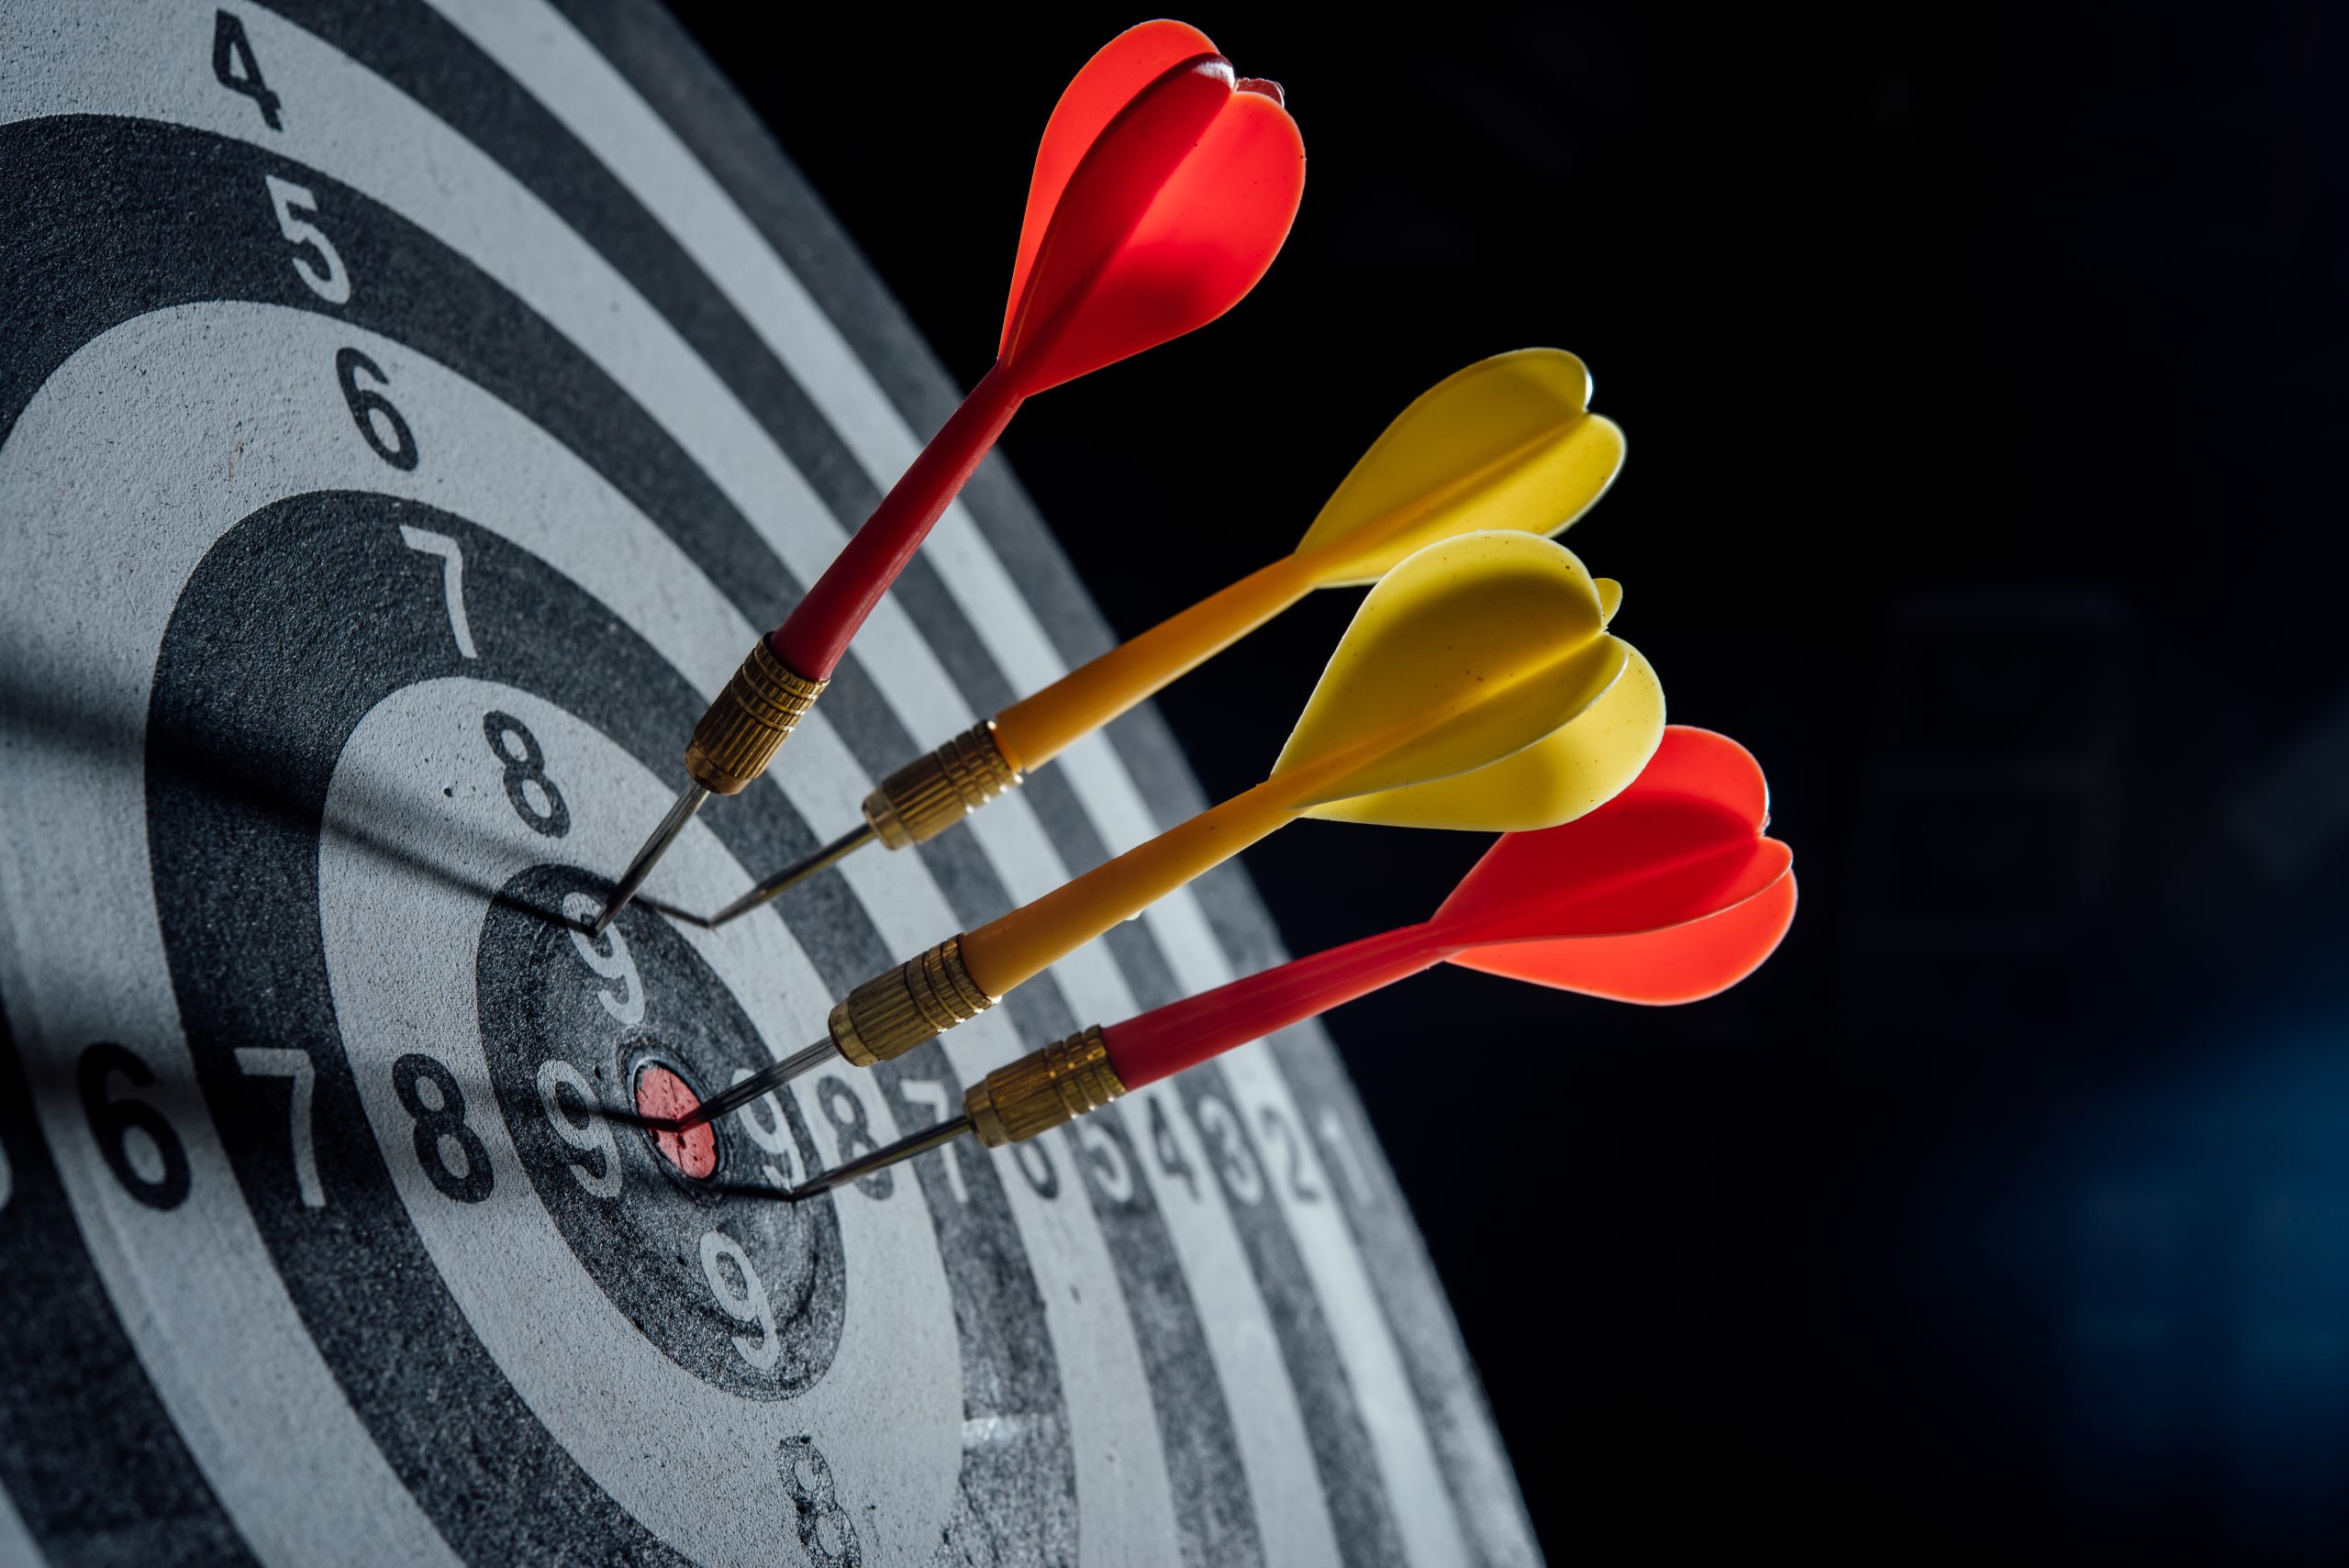 Three darts with red and yellow flights are embedded in the center of a dartboard, with the focus on goal setting. Image by jcompa on Freepik.